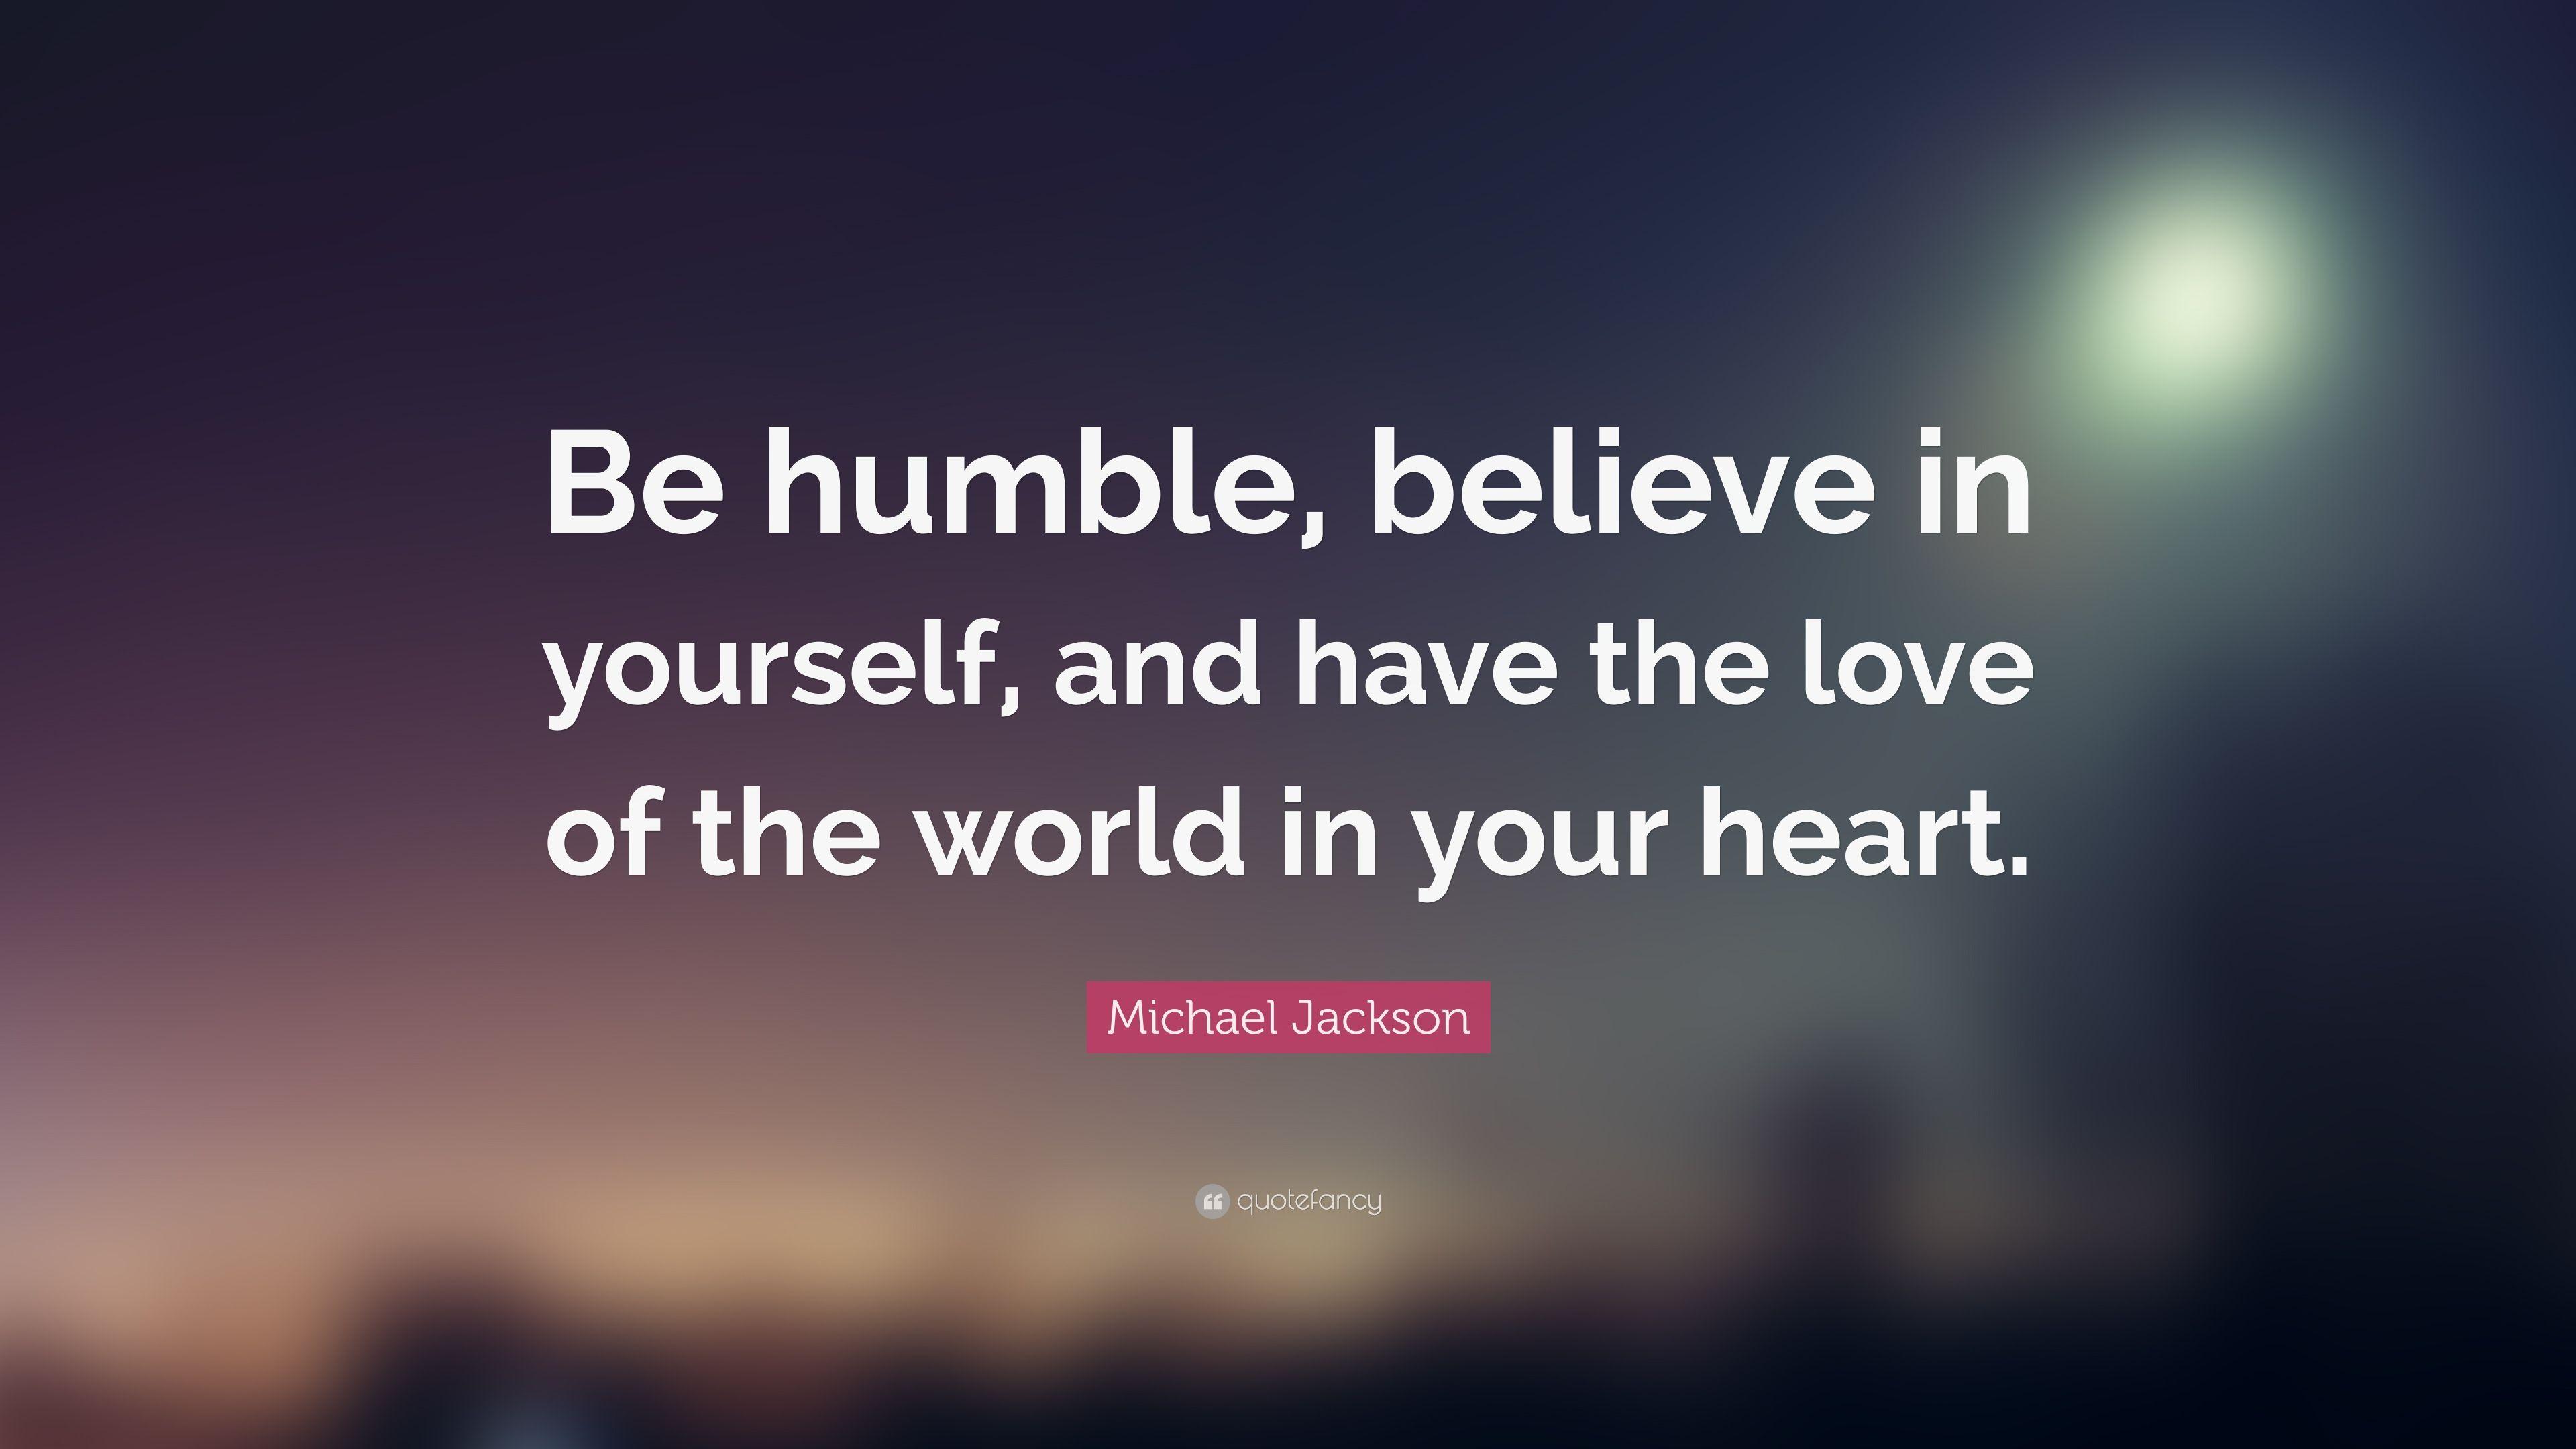 Michael Jackson Quote: “Be humble, believe in yourself, and have